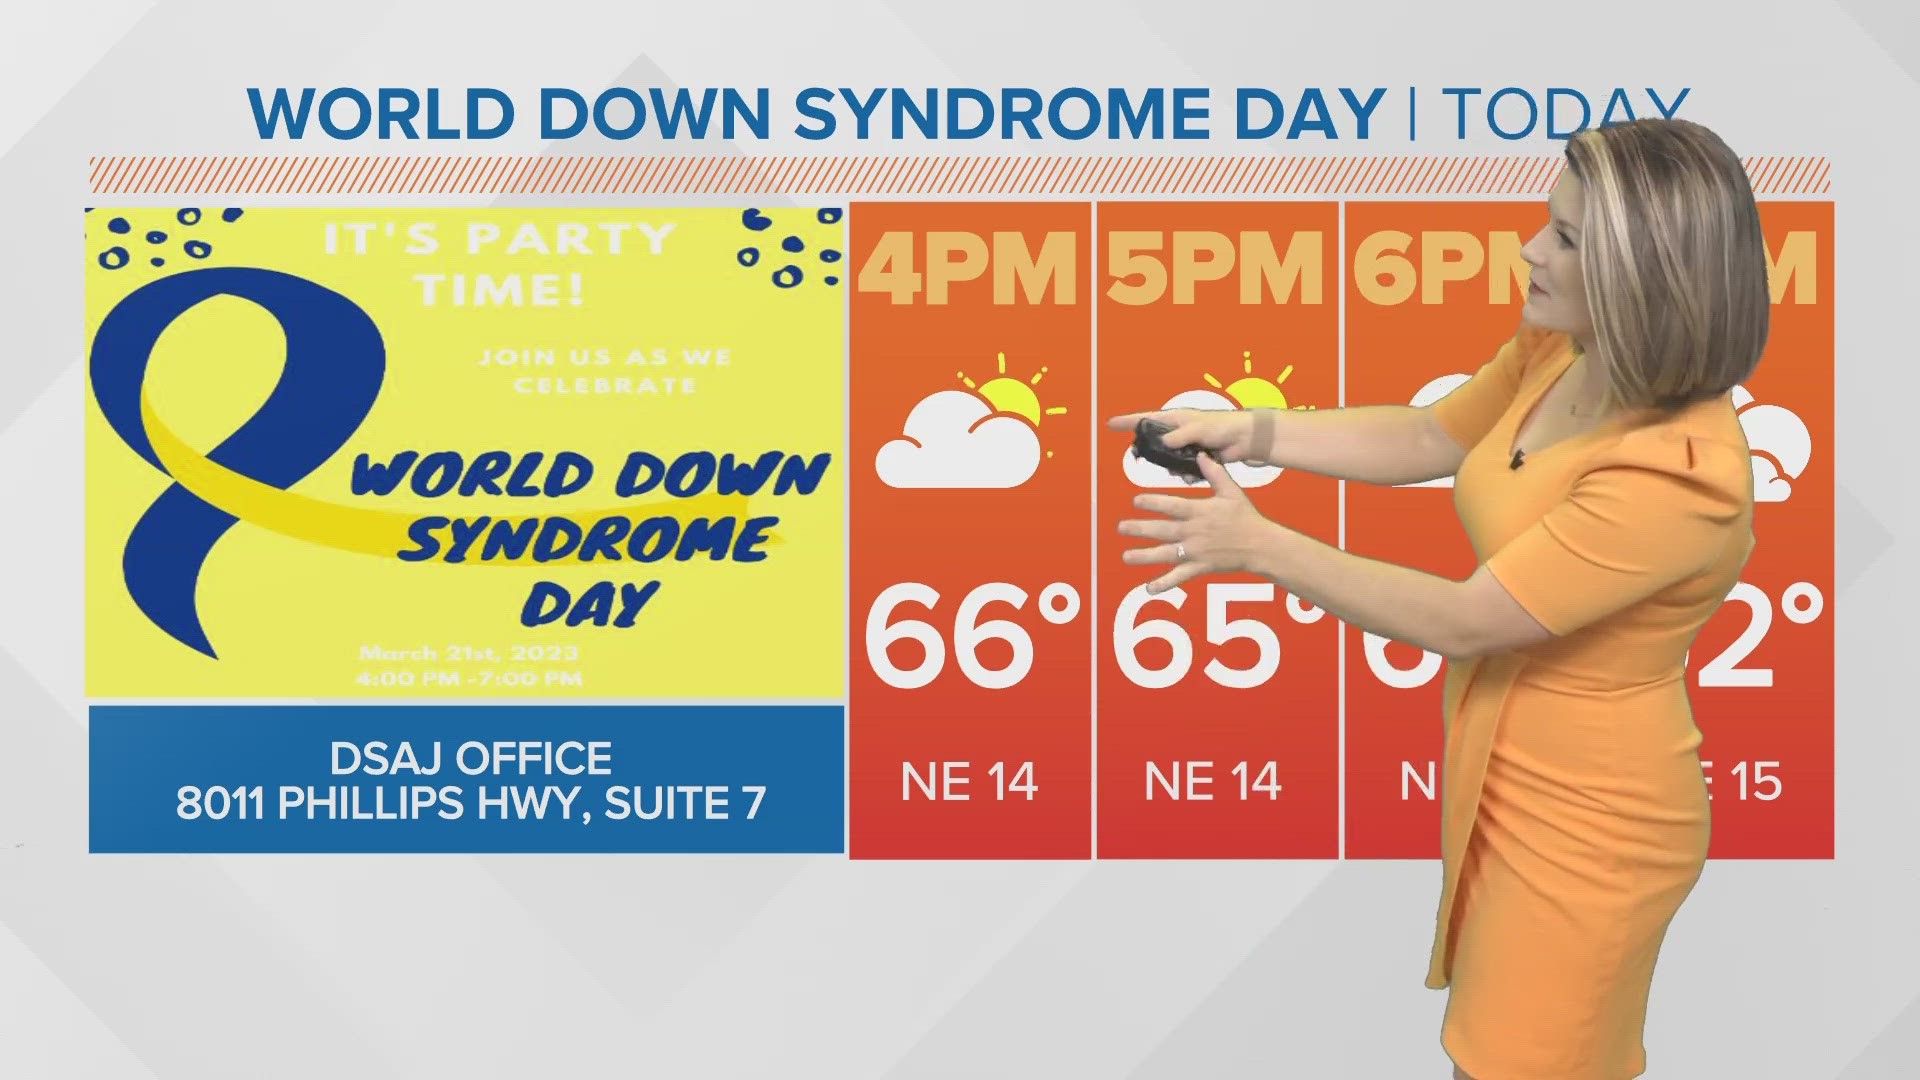 Meteorologist Lauren Rautenkranz encourages folks in Jacksonville to celebrate WDSD with the DSAJ on Tuesday afternoon off Phillips Highway and Baymeadows Rd.